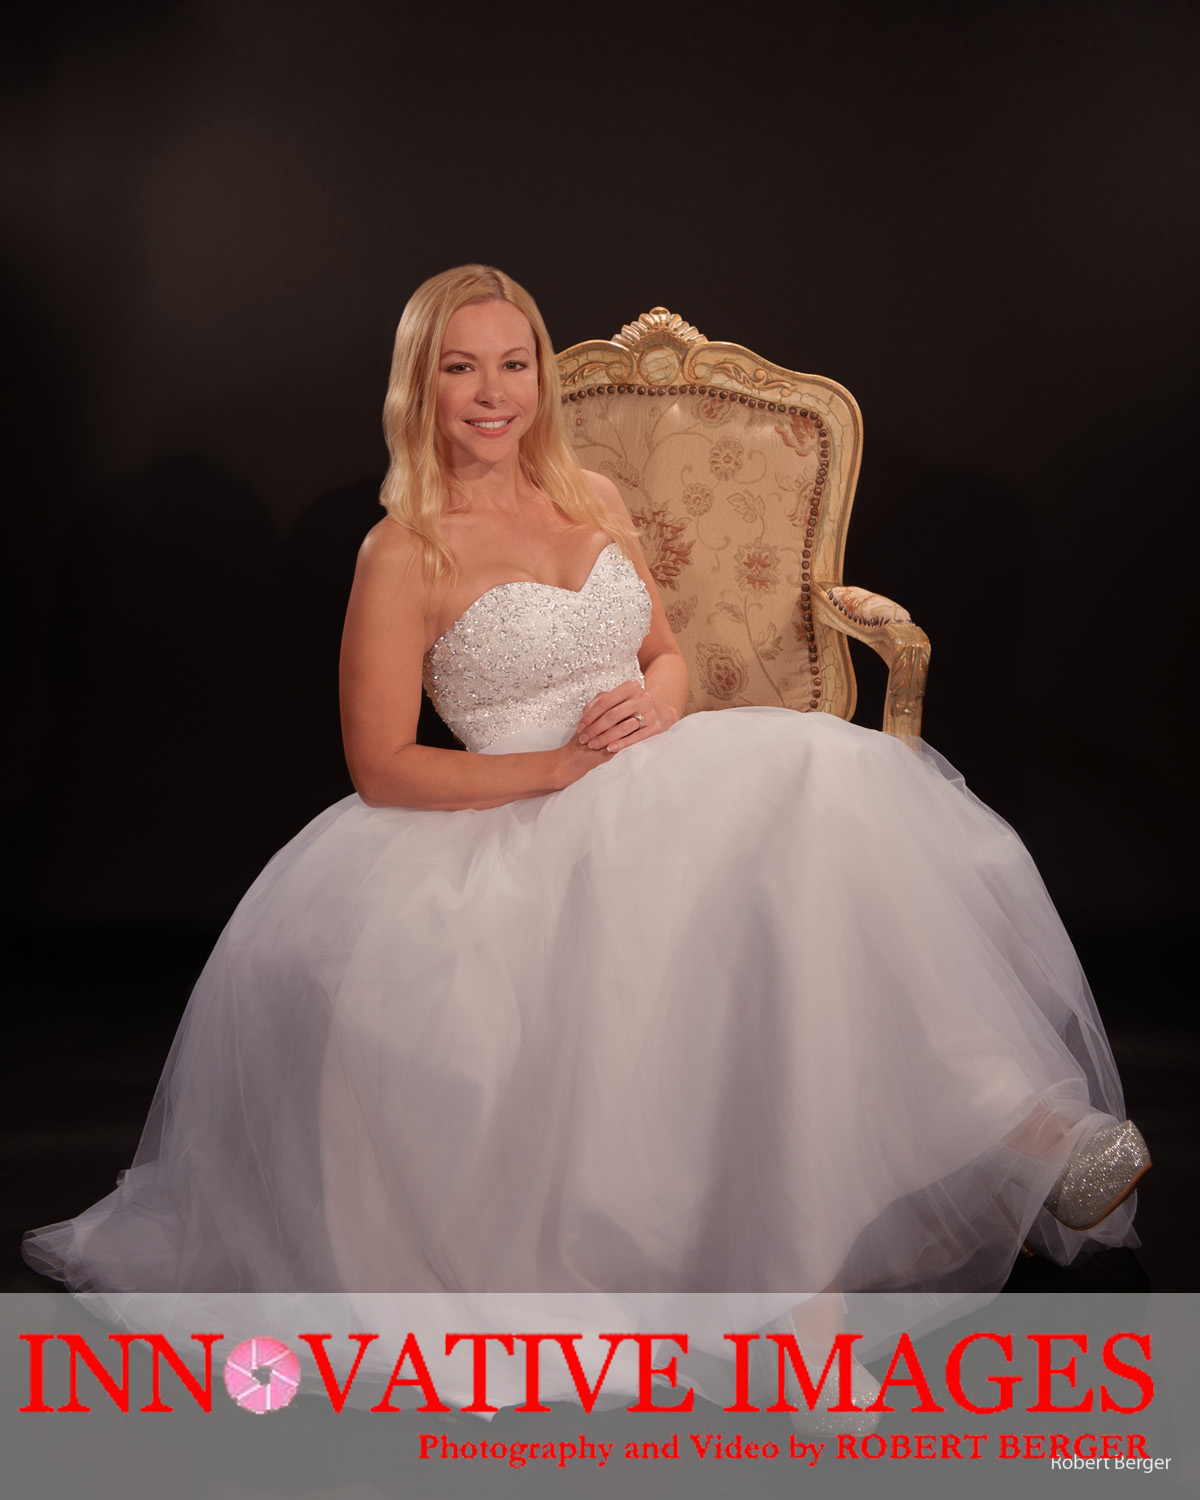 Bride in wedding dress photographed in photography studio sitting down in a casual pose. professional studio portrait using hollywood glamour lighting by Innovative Images Photography by Robert Berger in Houston Texas